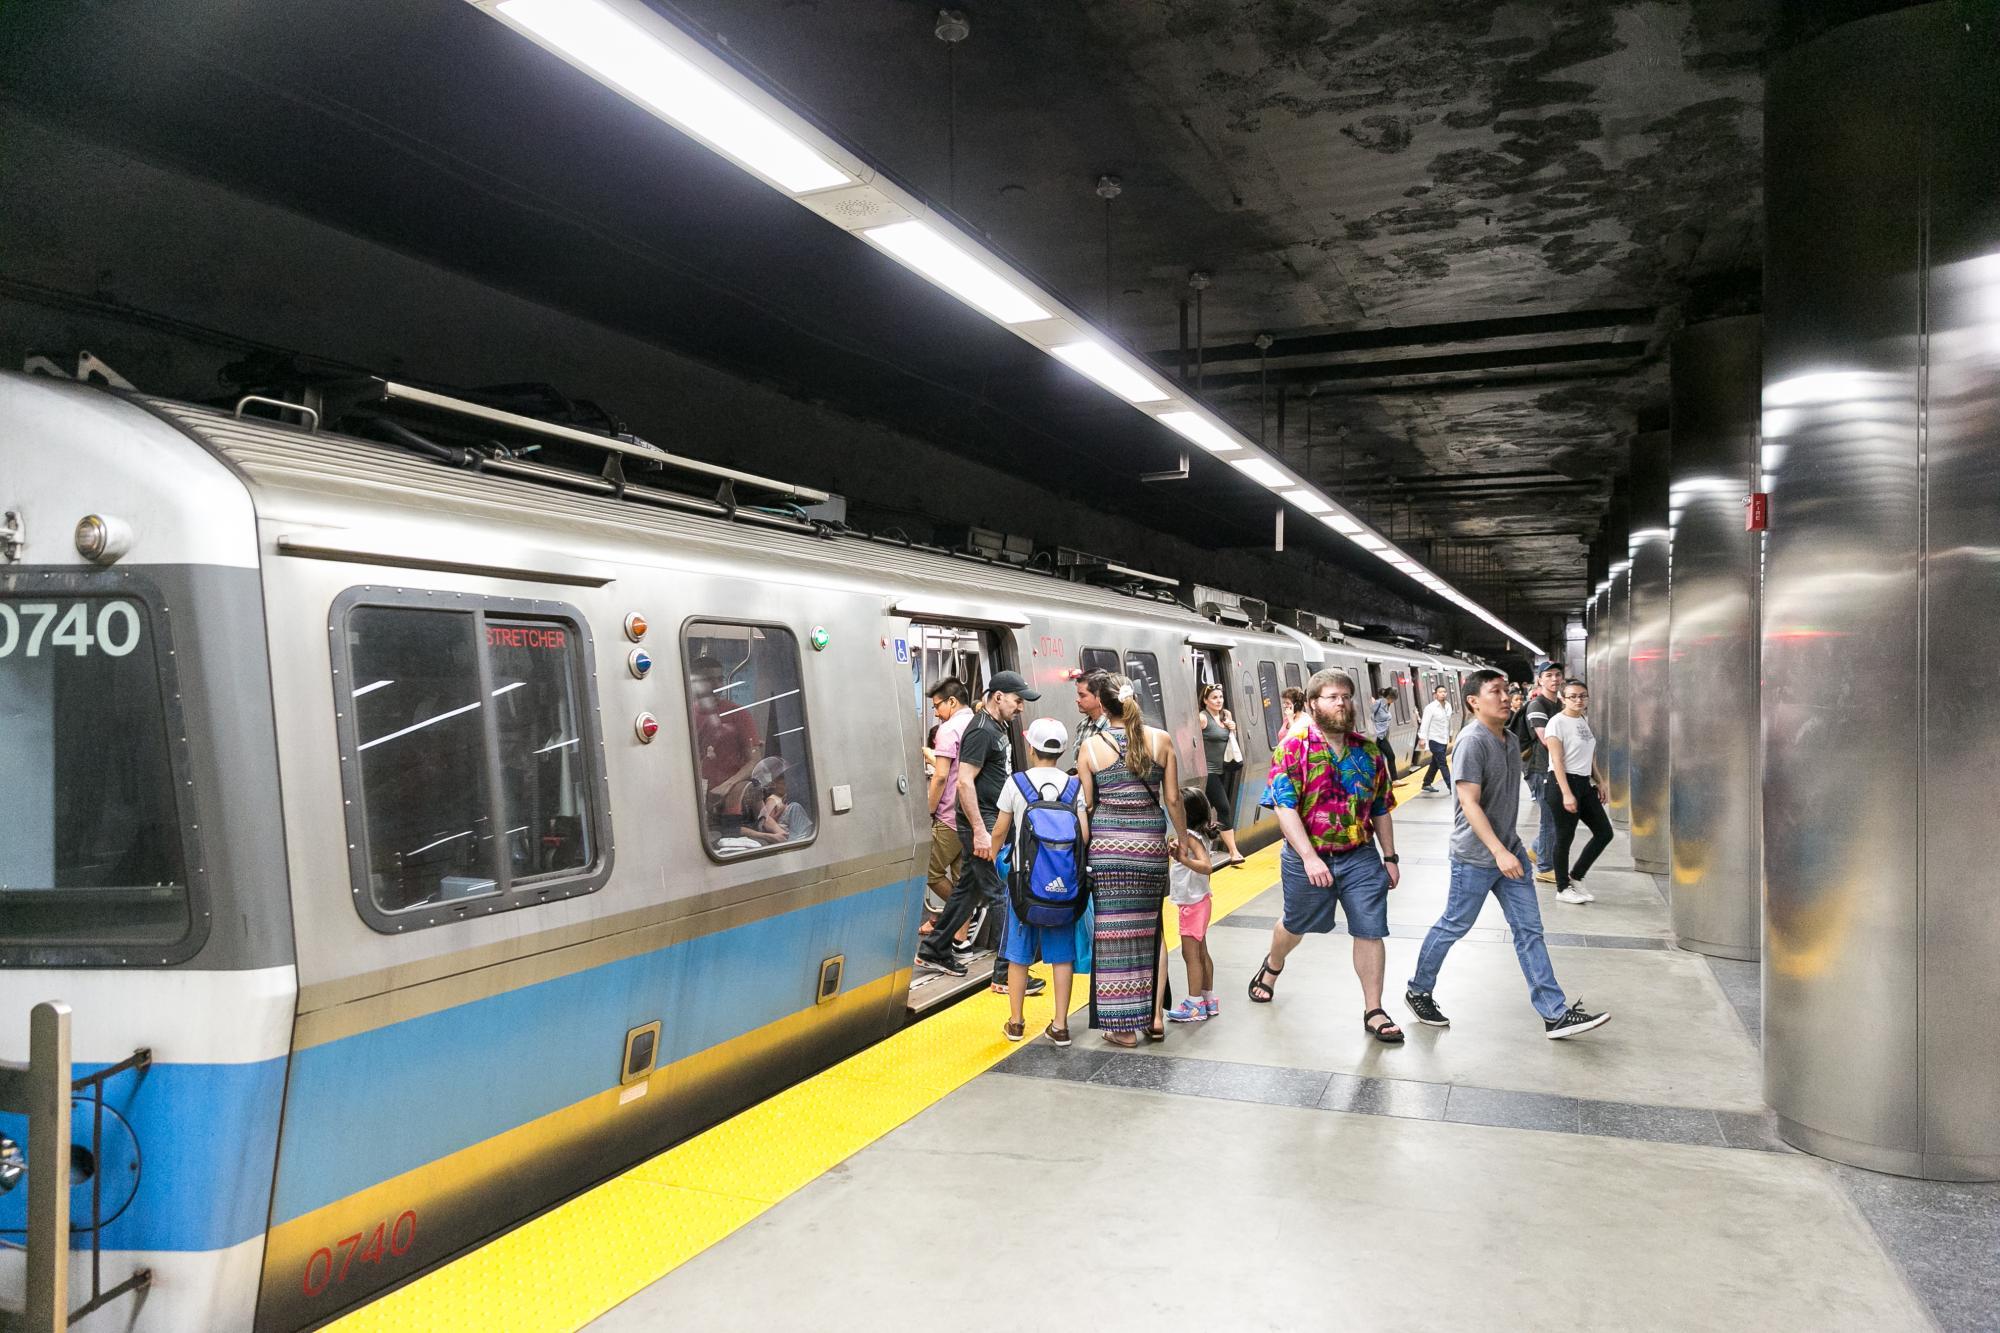 Riders boarding and existing a Blue Line train at Maverick, on the outbound platform.